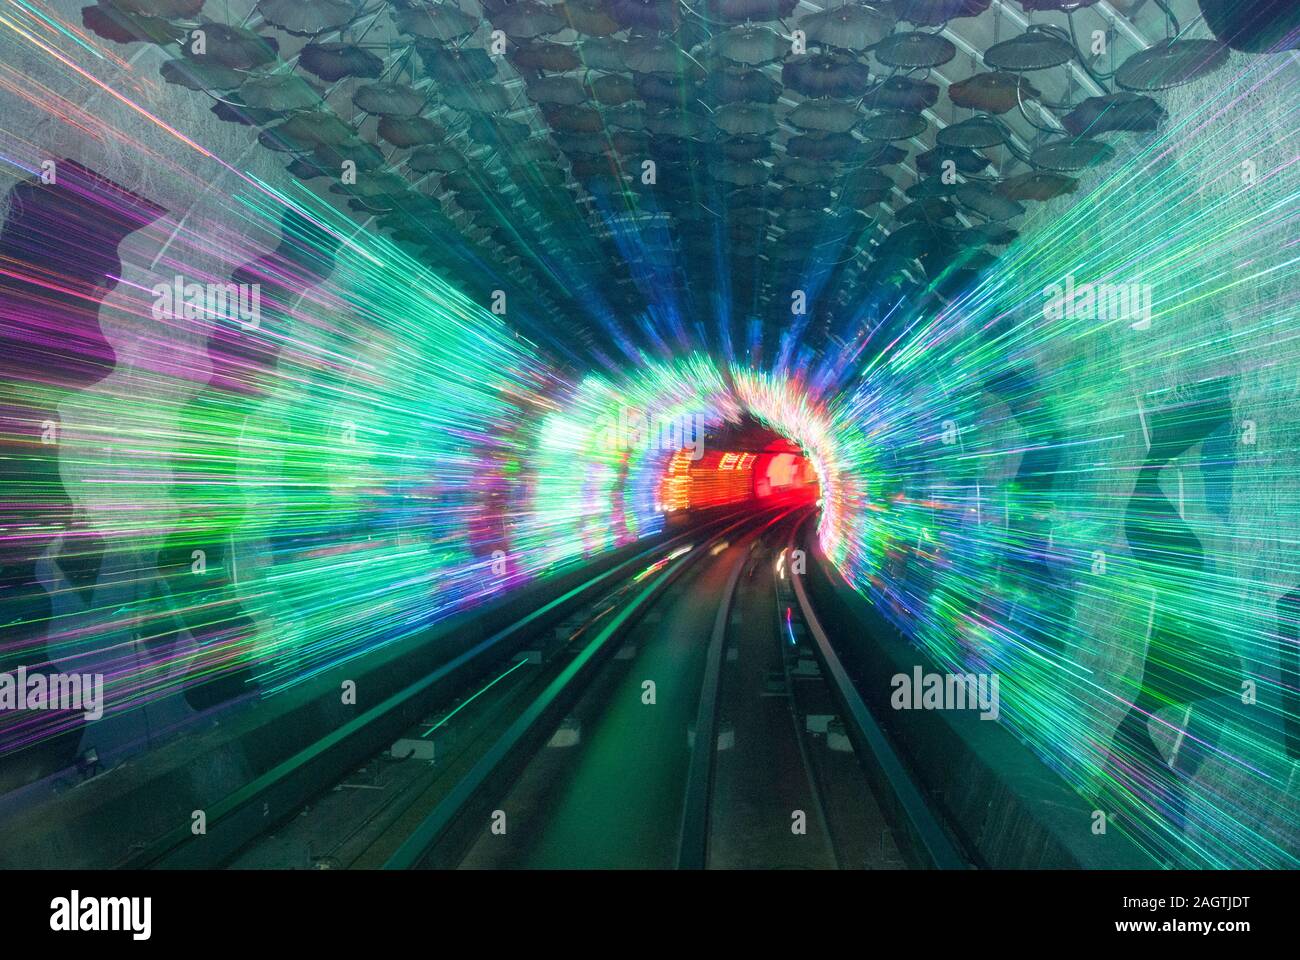 Laser Show di Shanghai sightseeing tunnel sotto il Fiume Huangpu Foto Stock